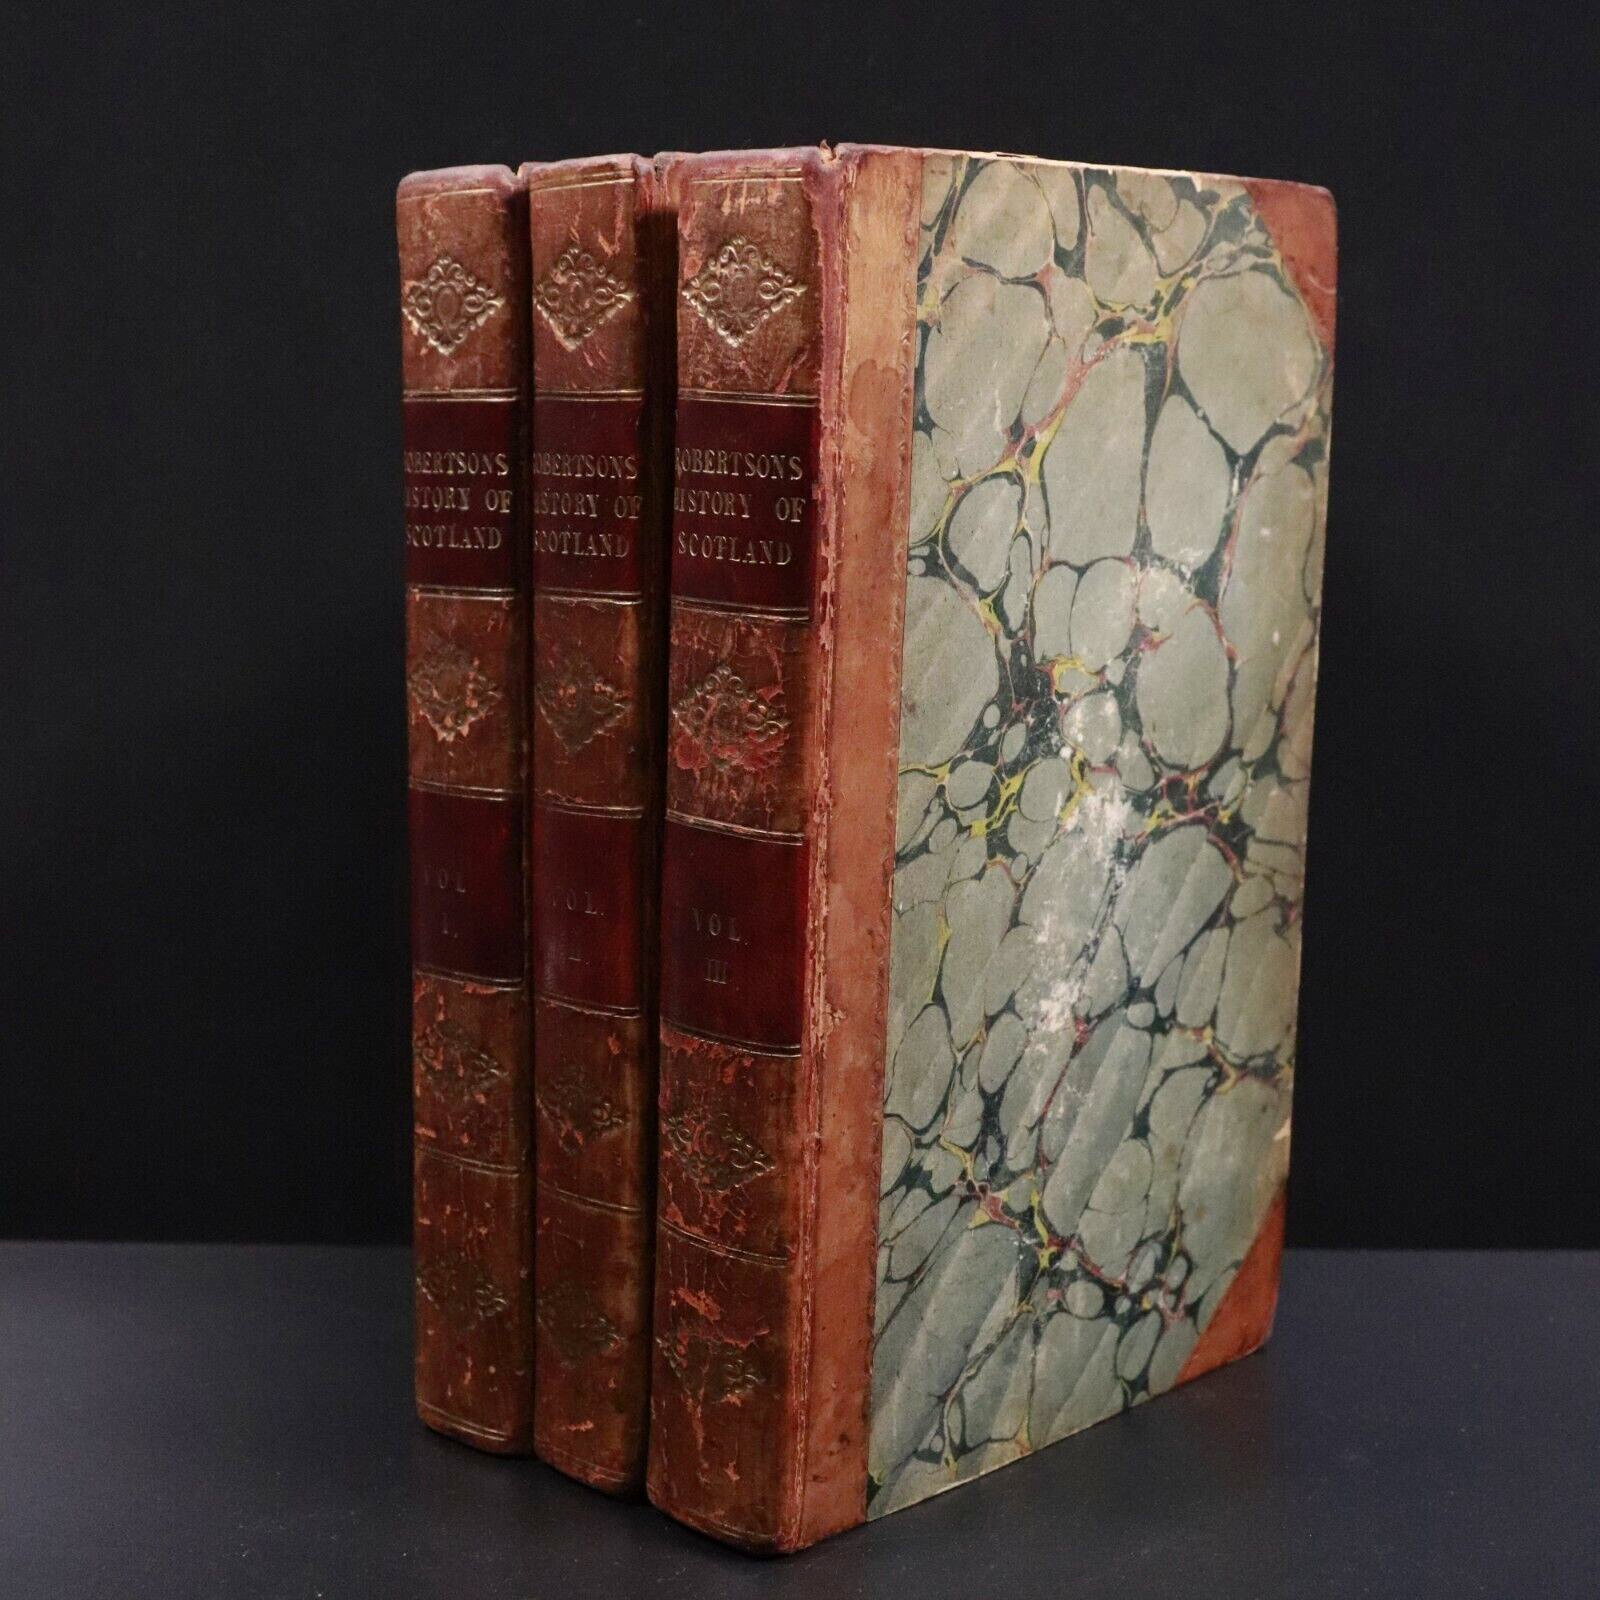 1809 3vol The History Of Scotland by William Robertson - Antiquarian Book Set